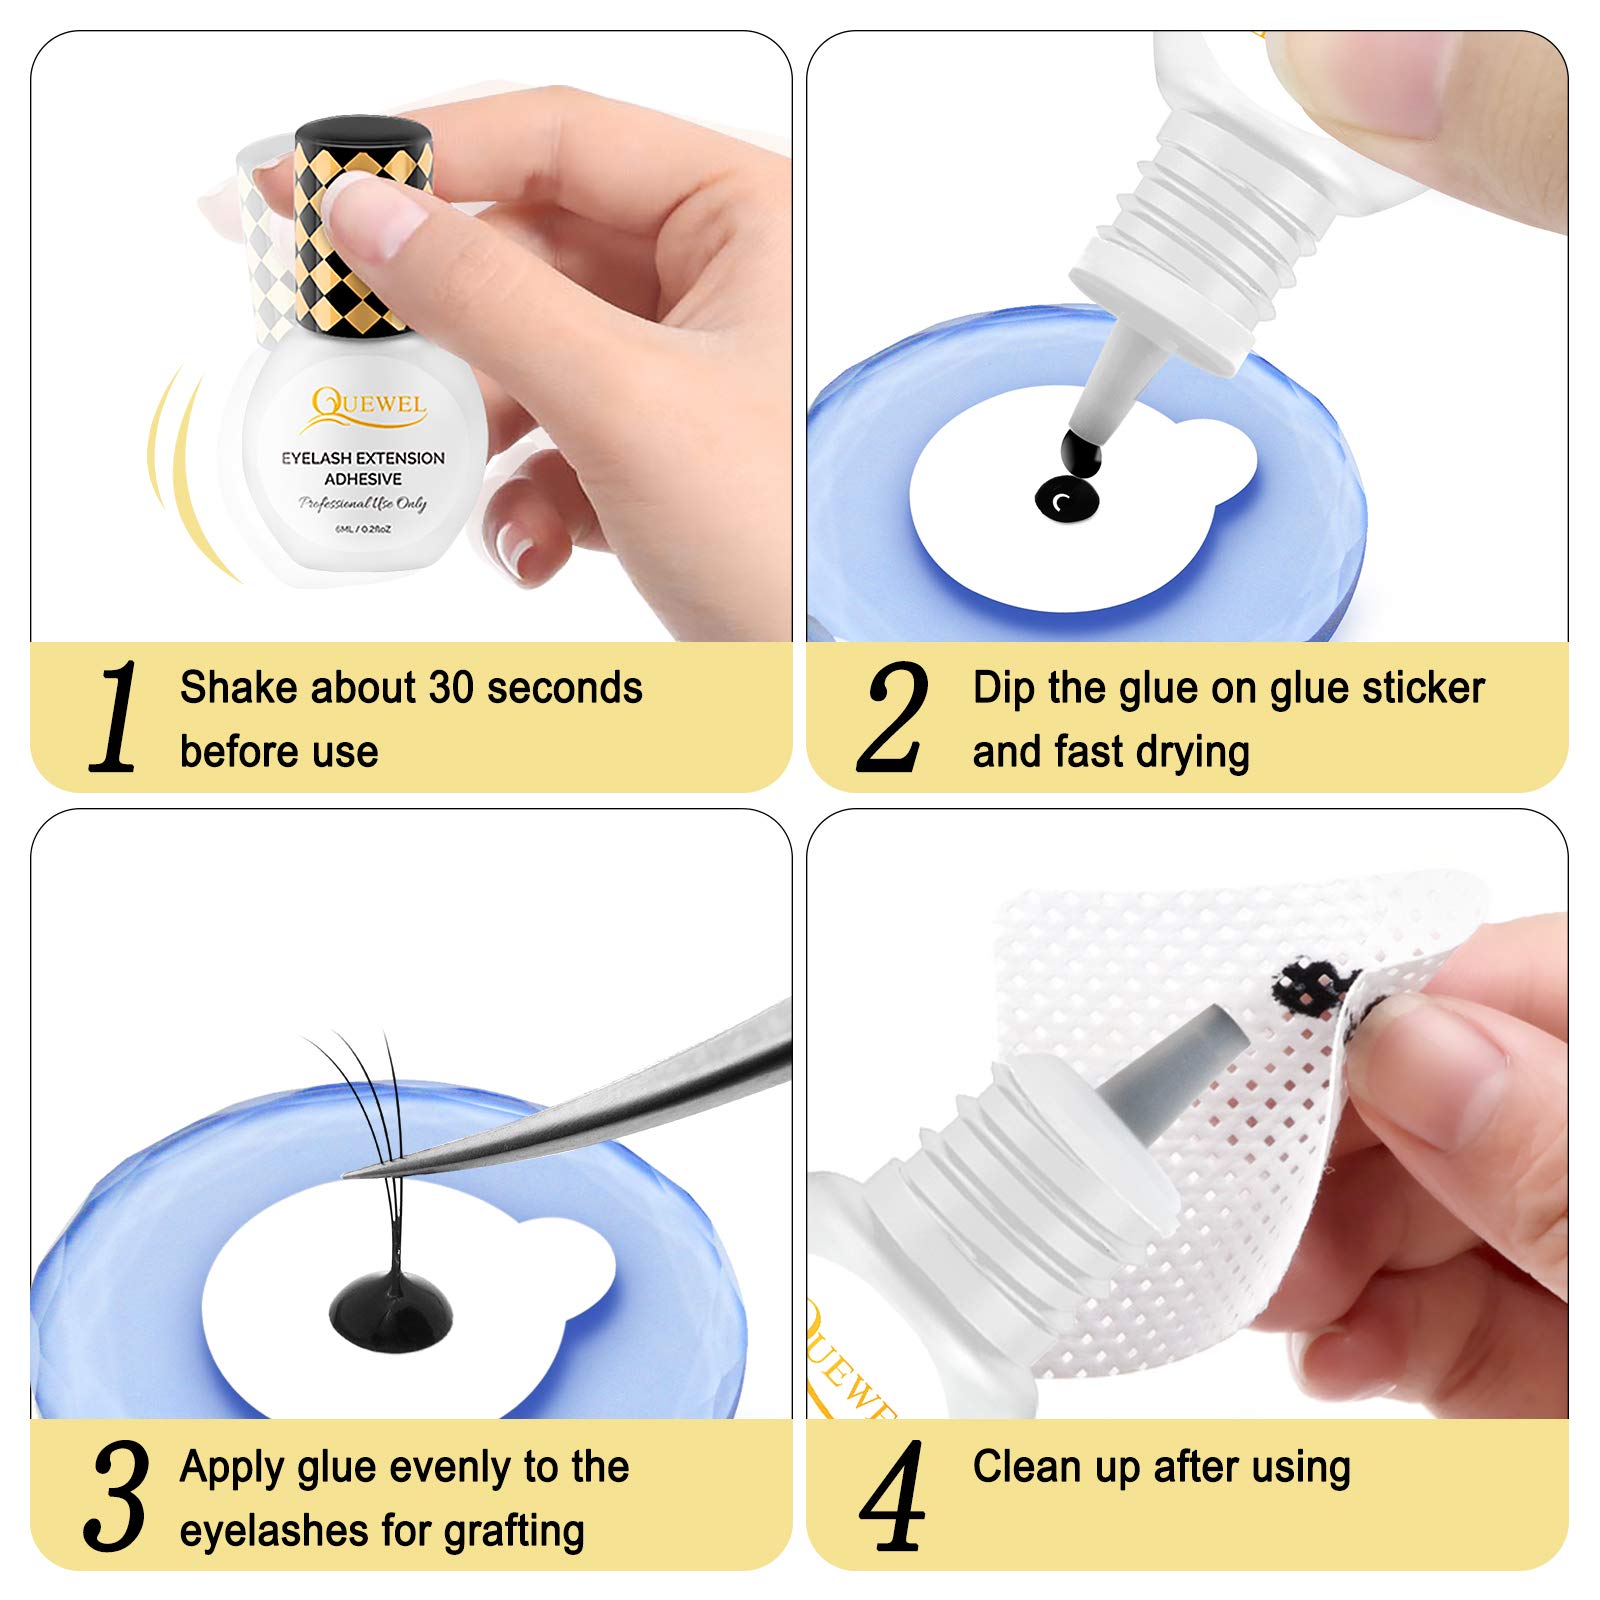 QUEWEL Strong Black Adhesive for Eyelash Extensions 6ml 1-2 Sec Drying Time,Retention 7-8 Weeks,The Lash Extension Glue Low Fume No Irritating for Sensitive